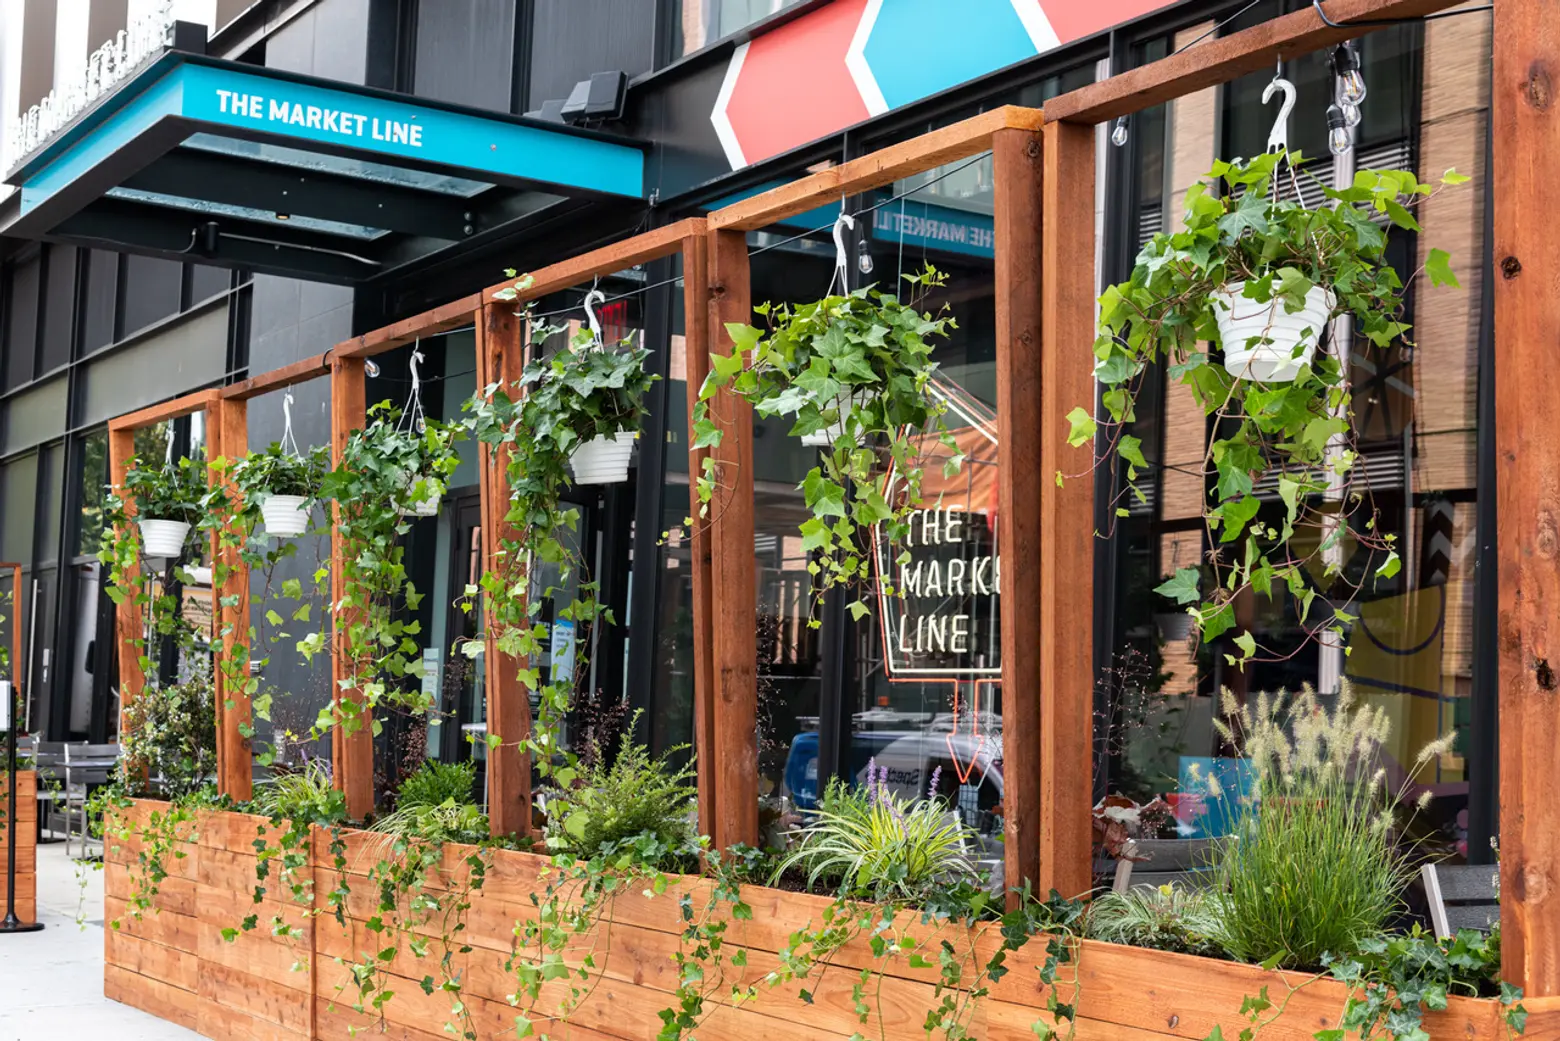 Outdoor dining comes to two NYC food halls